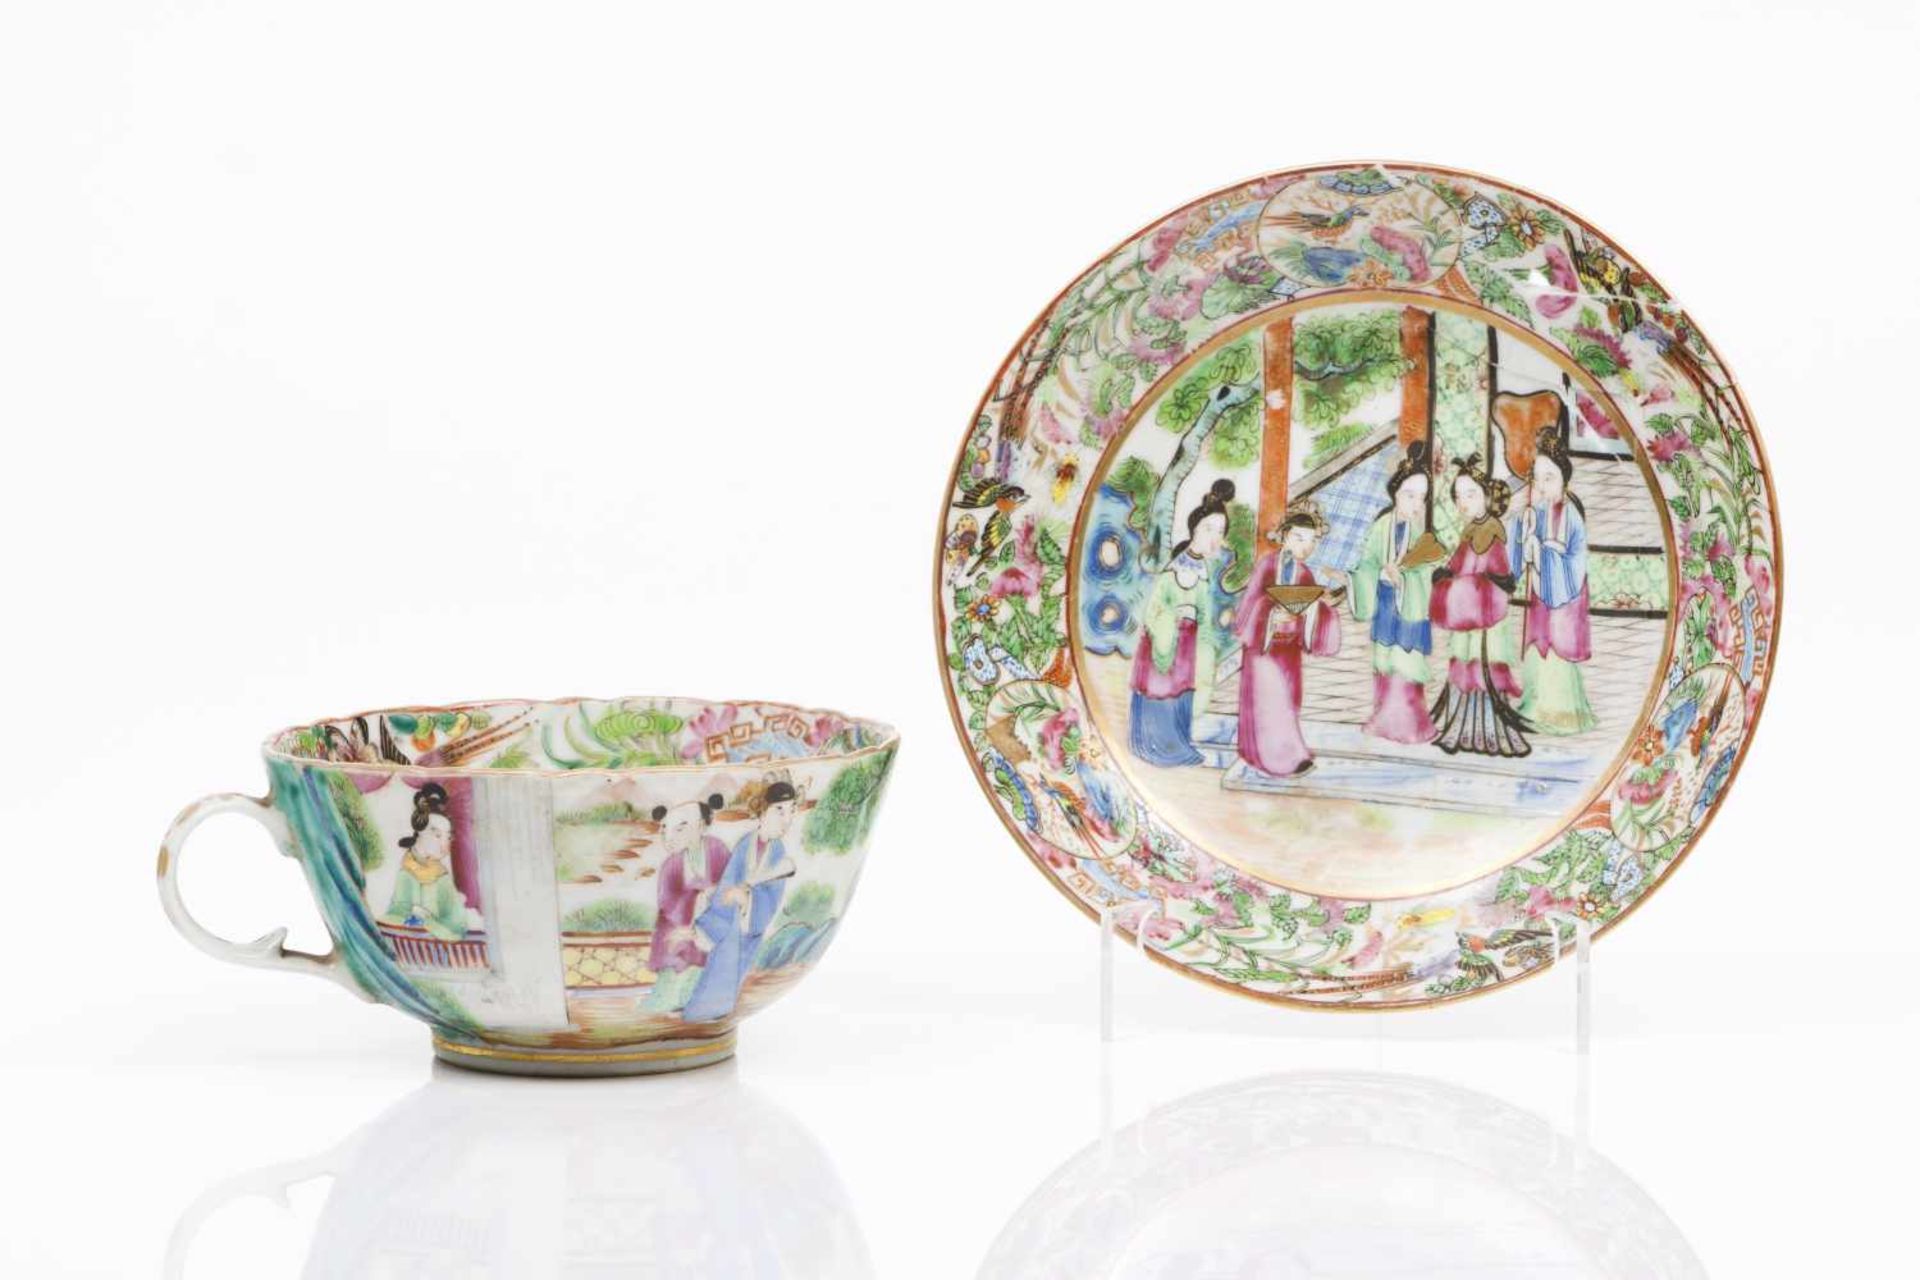 A cup and saucerChinese porcelainPolychrome and gilt decoration said "Canton" depicting chinese